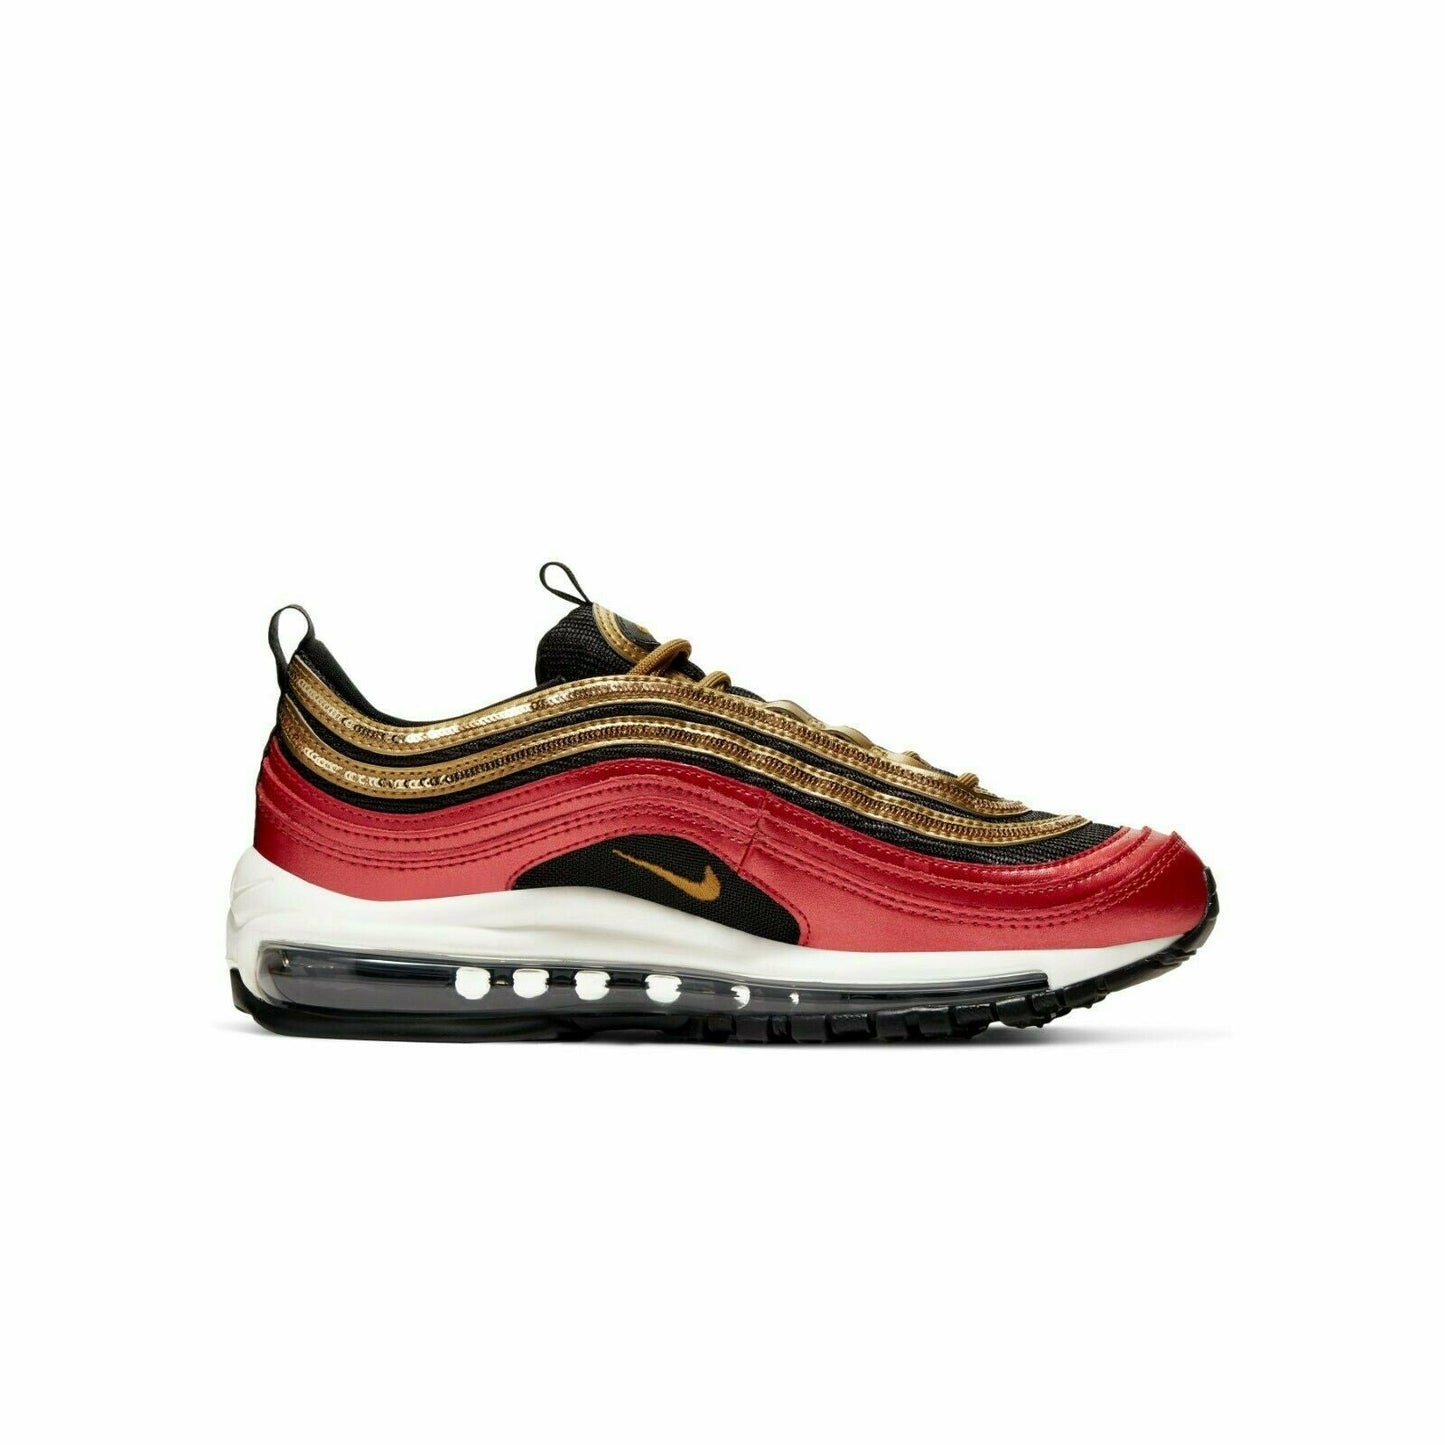 Nike Women's Air Max 97 Red Gold Sequin CT1148-600